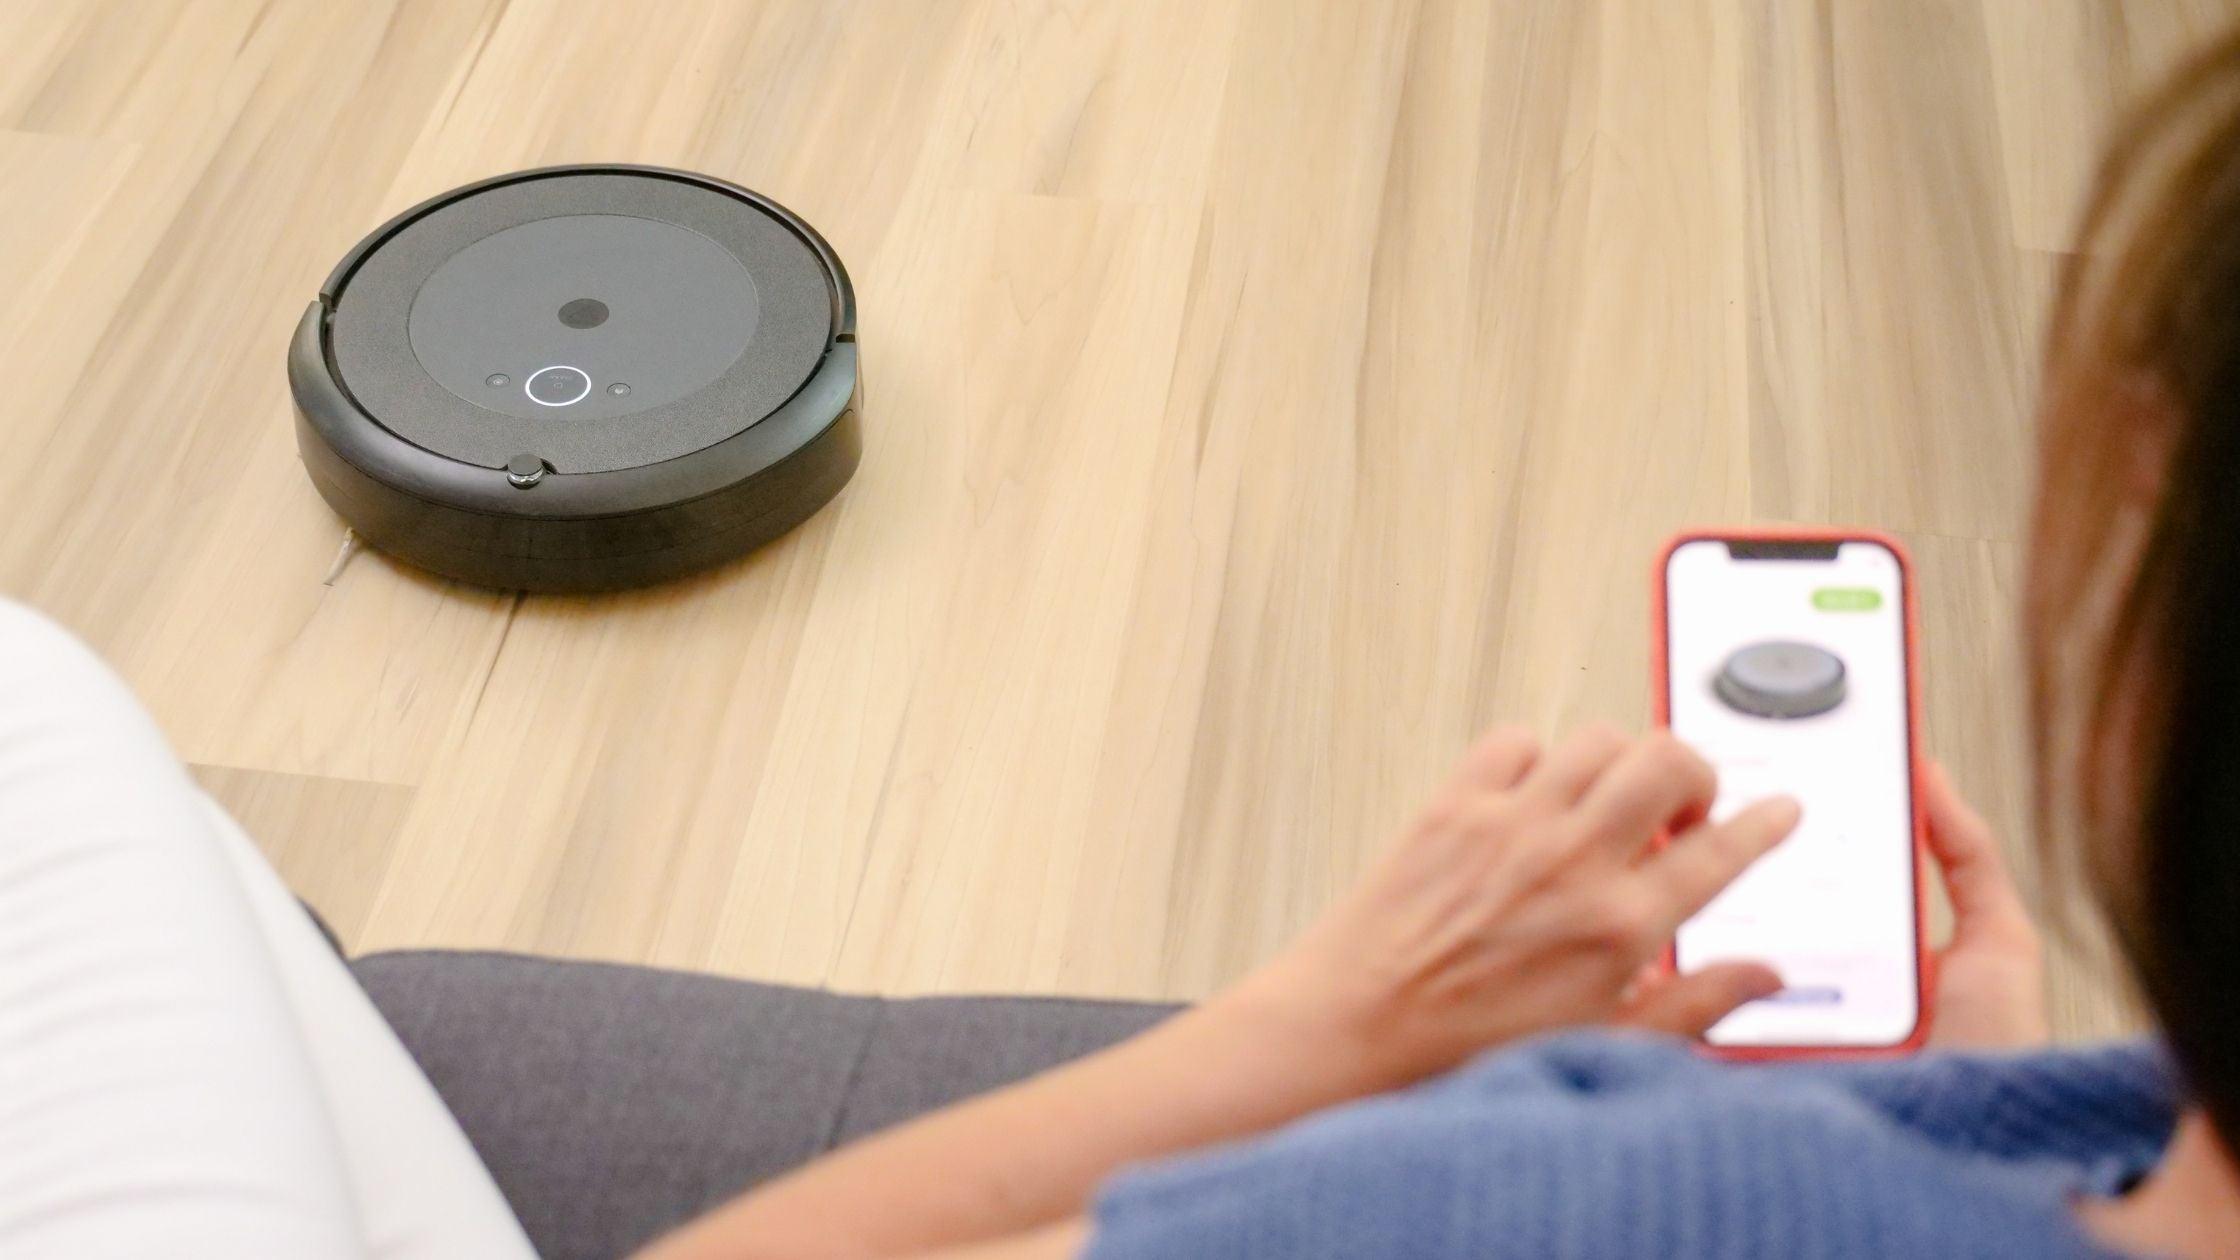 Shop Robot vacuum cleaner at www.Siyu.ie